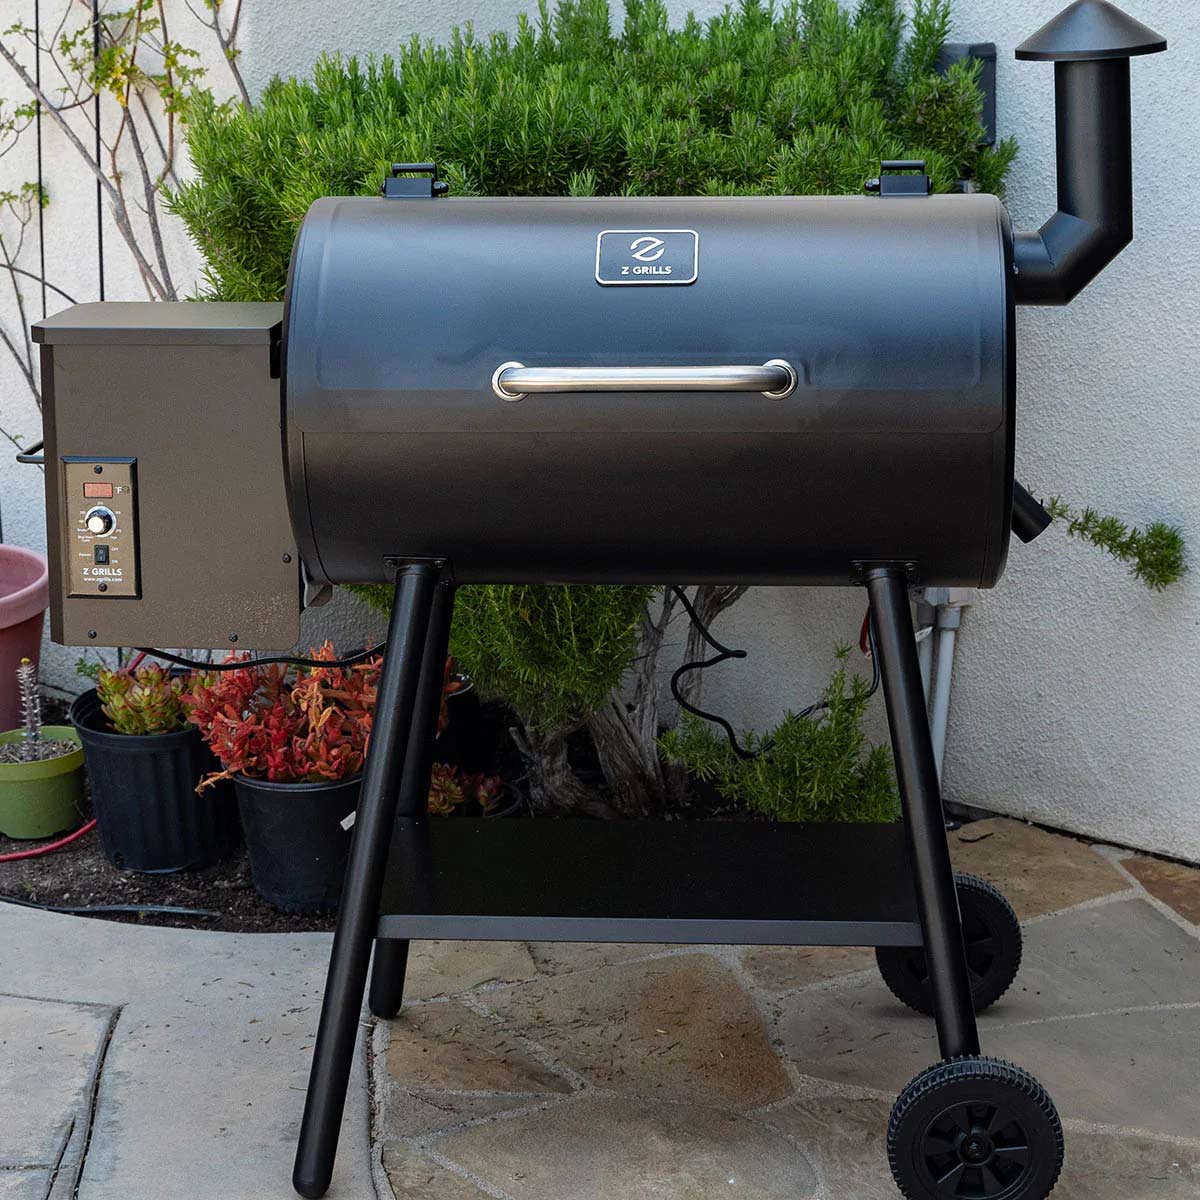 Z GRILLS 550B2 Wood Pellet Grill and Electric Smoker w/ Auto